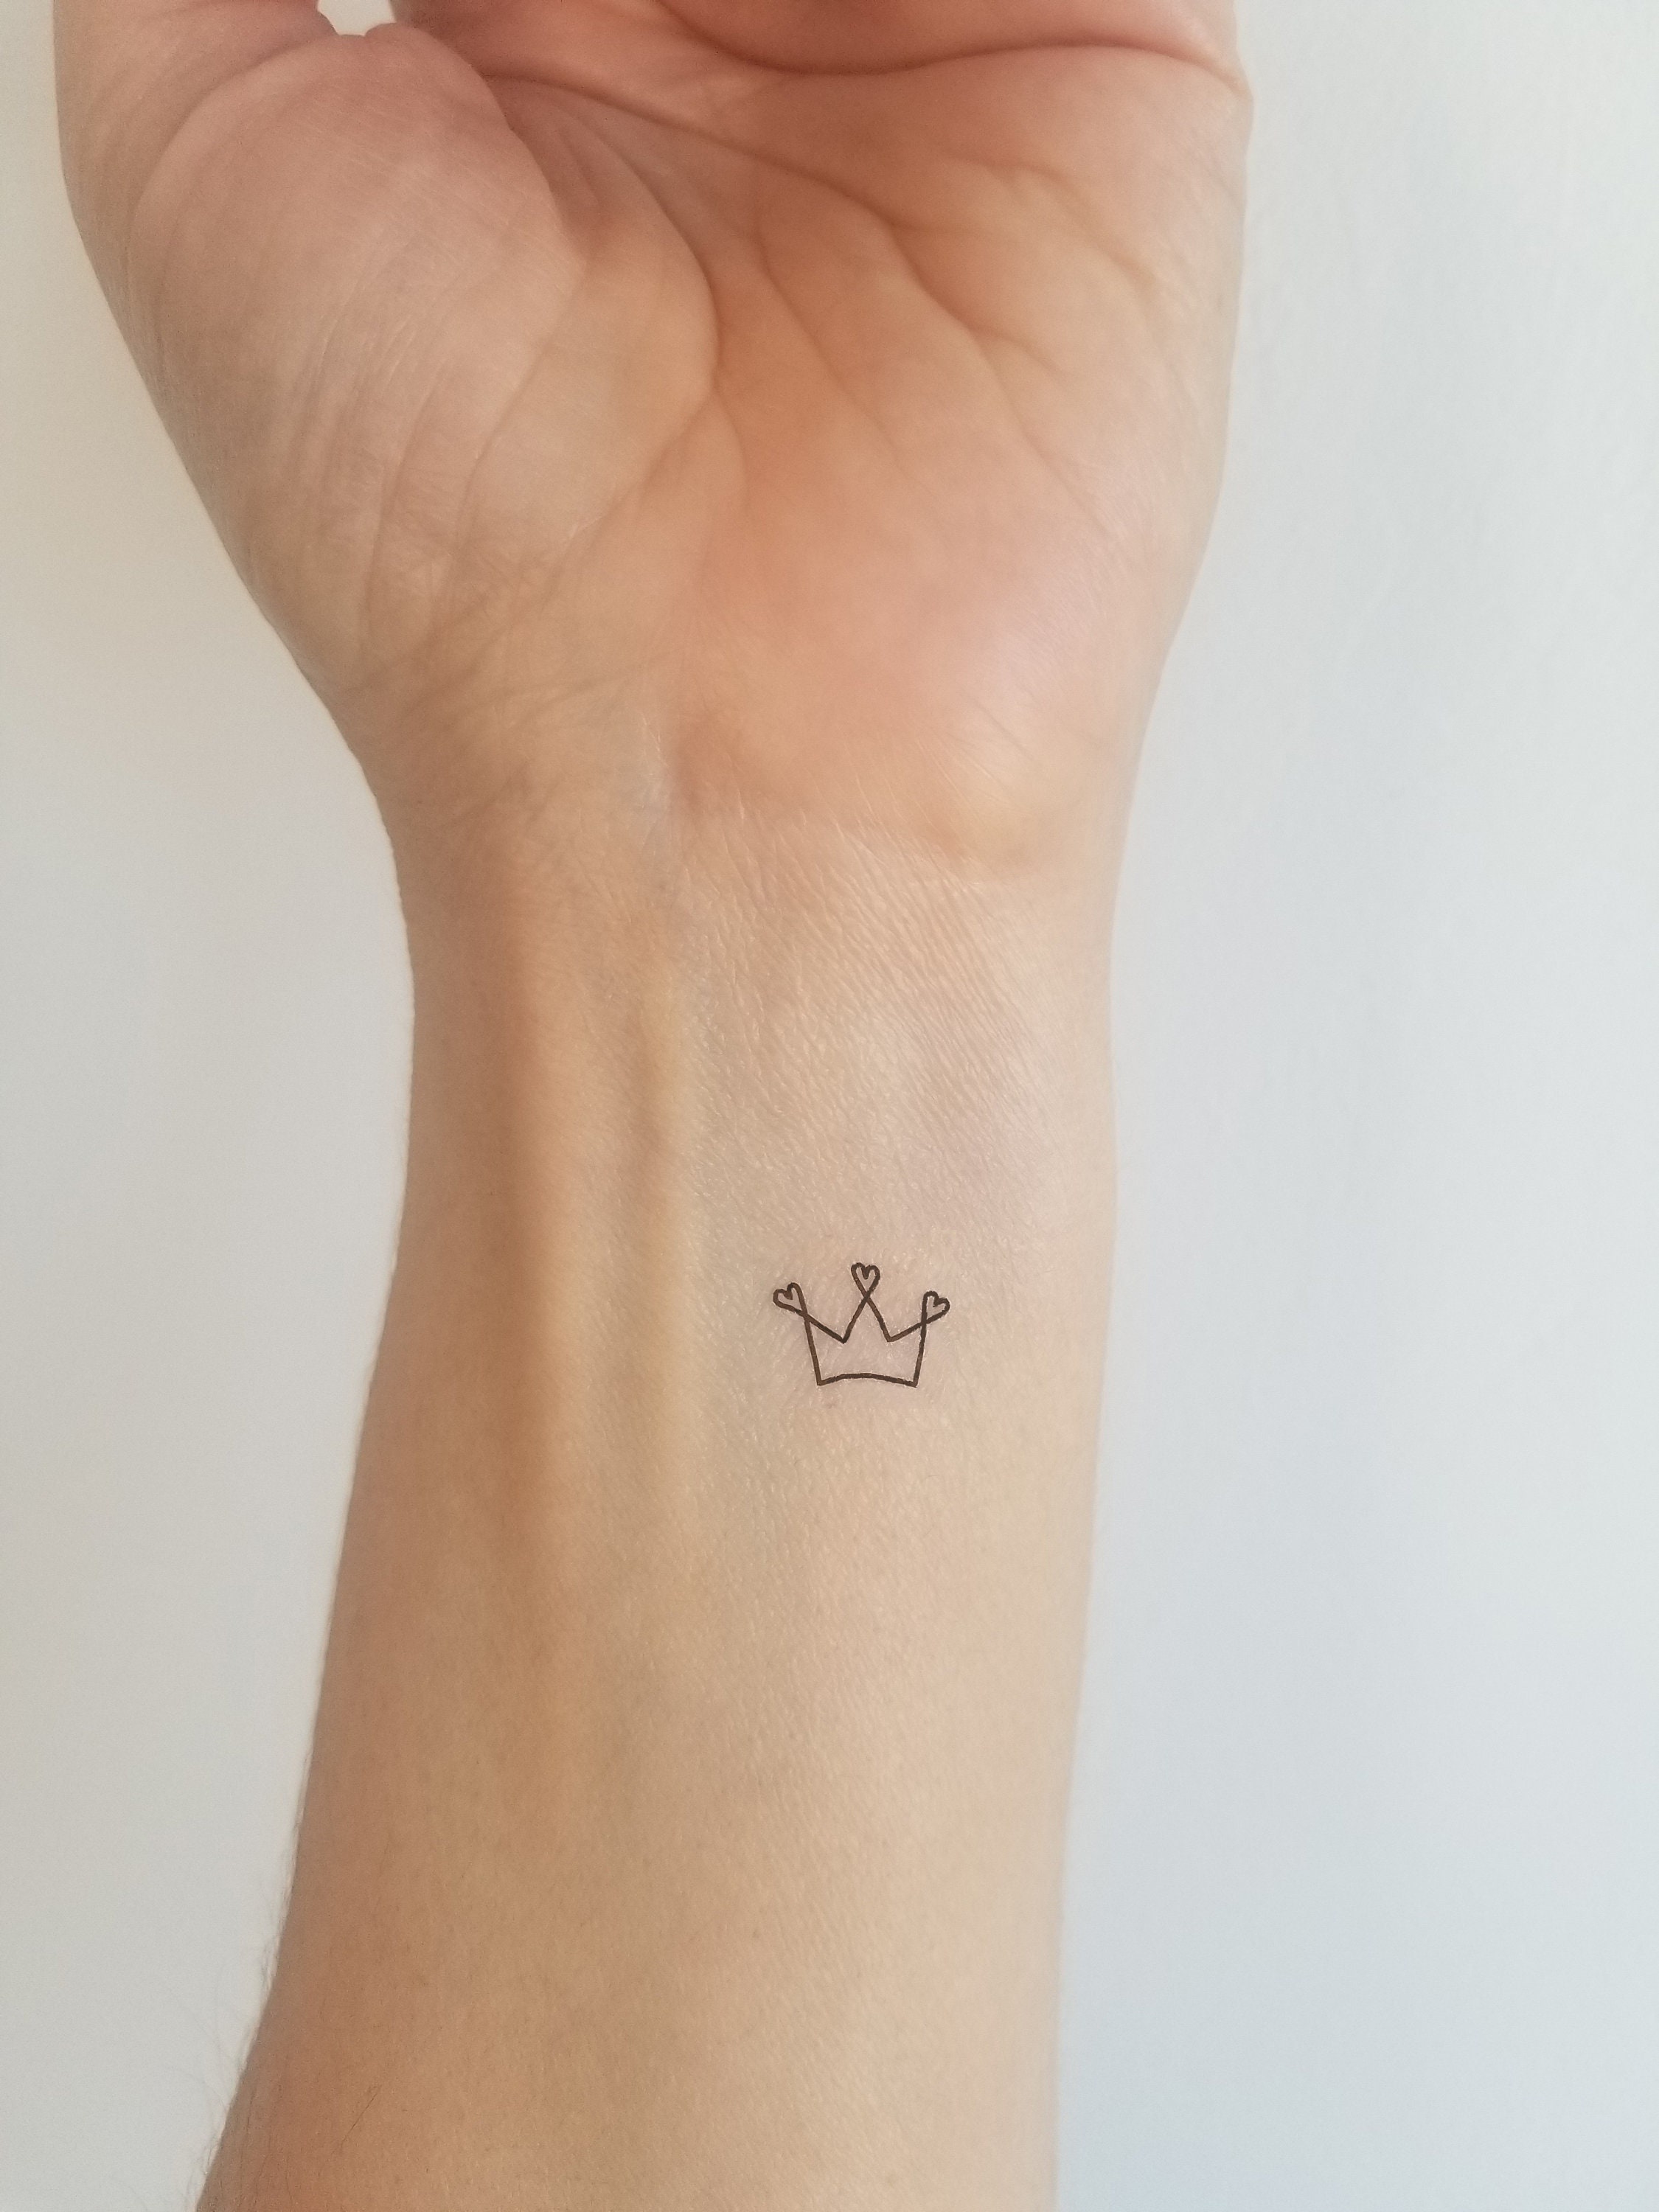 Minimalist Tattoo Ideas & Designs That Prove Subtle Things Can Be The Most  Beautiful – Black Poison Tattoos